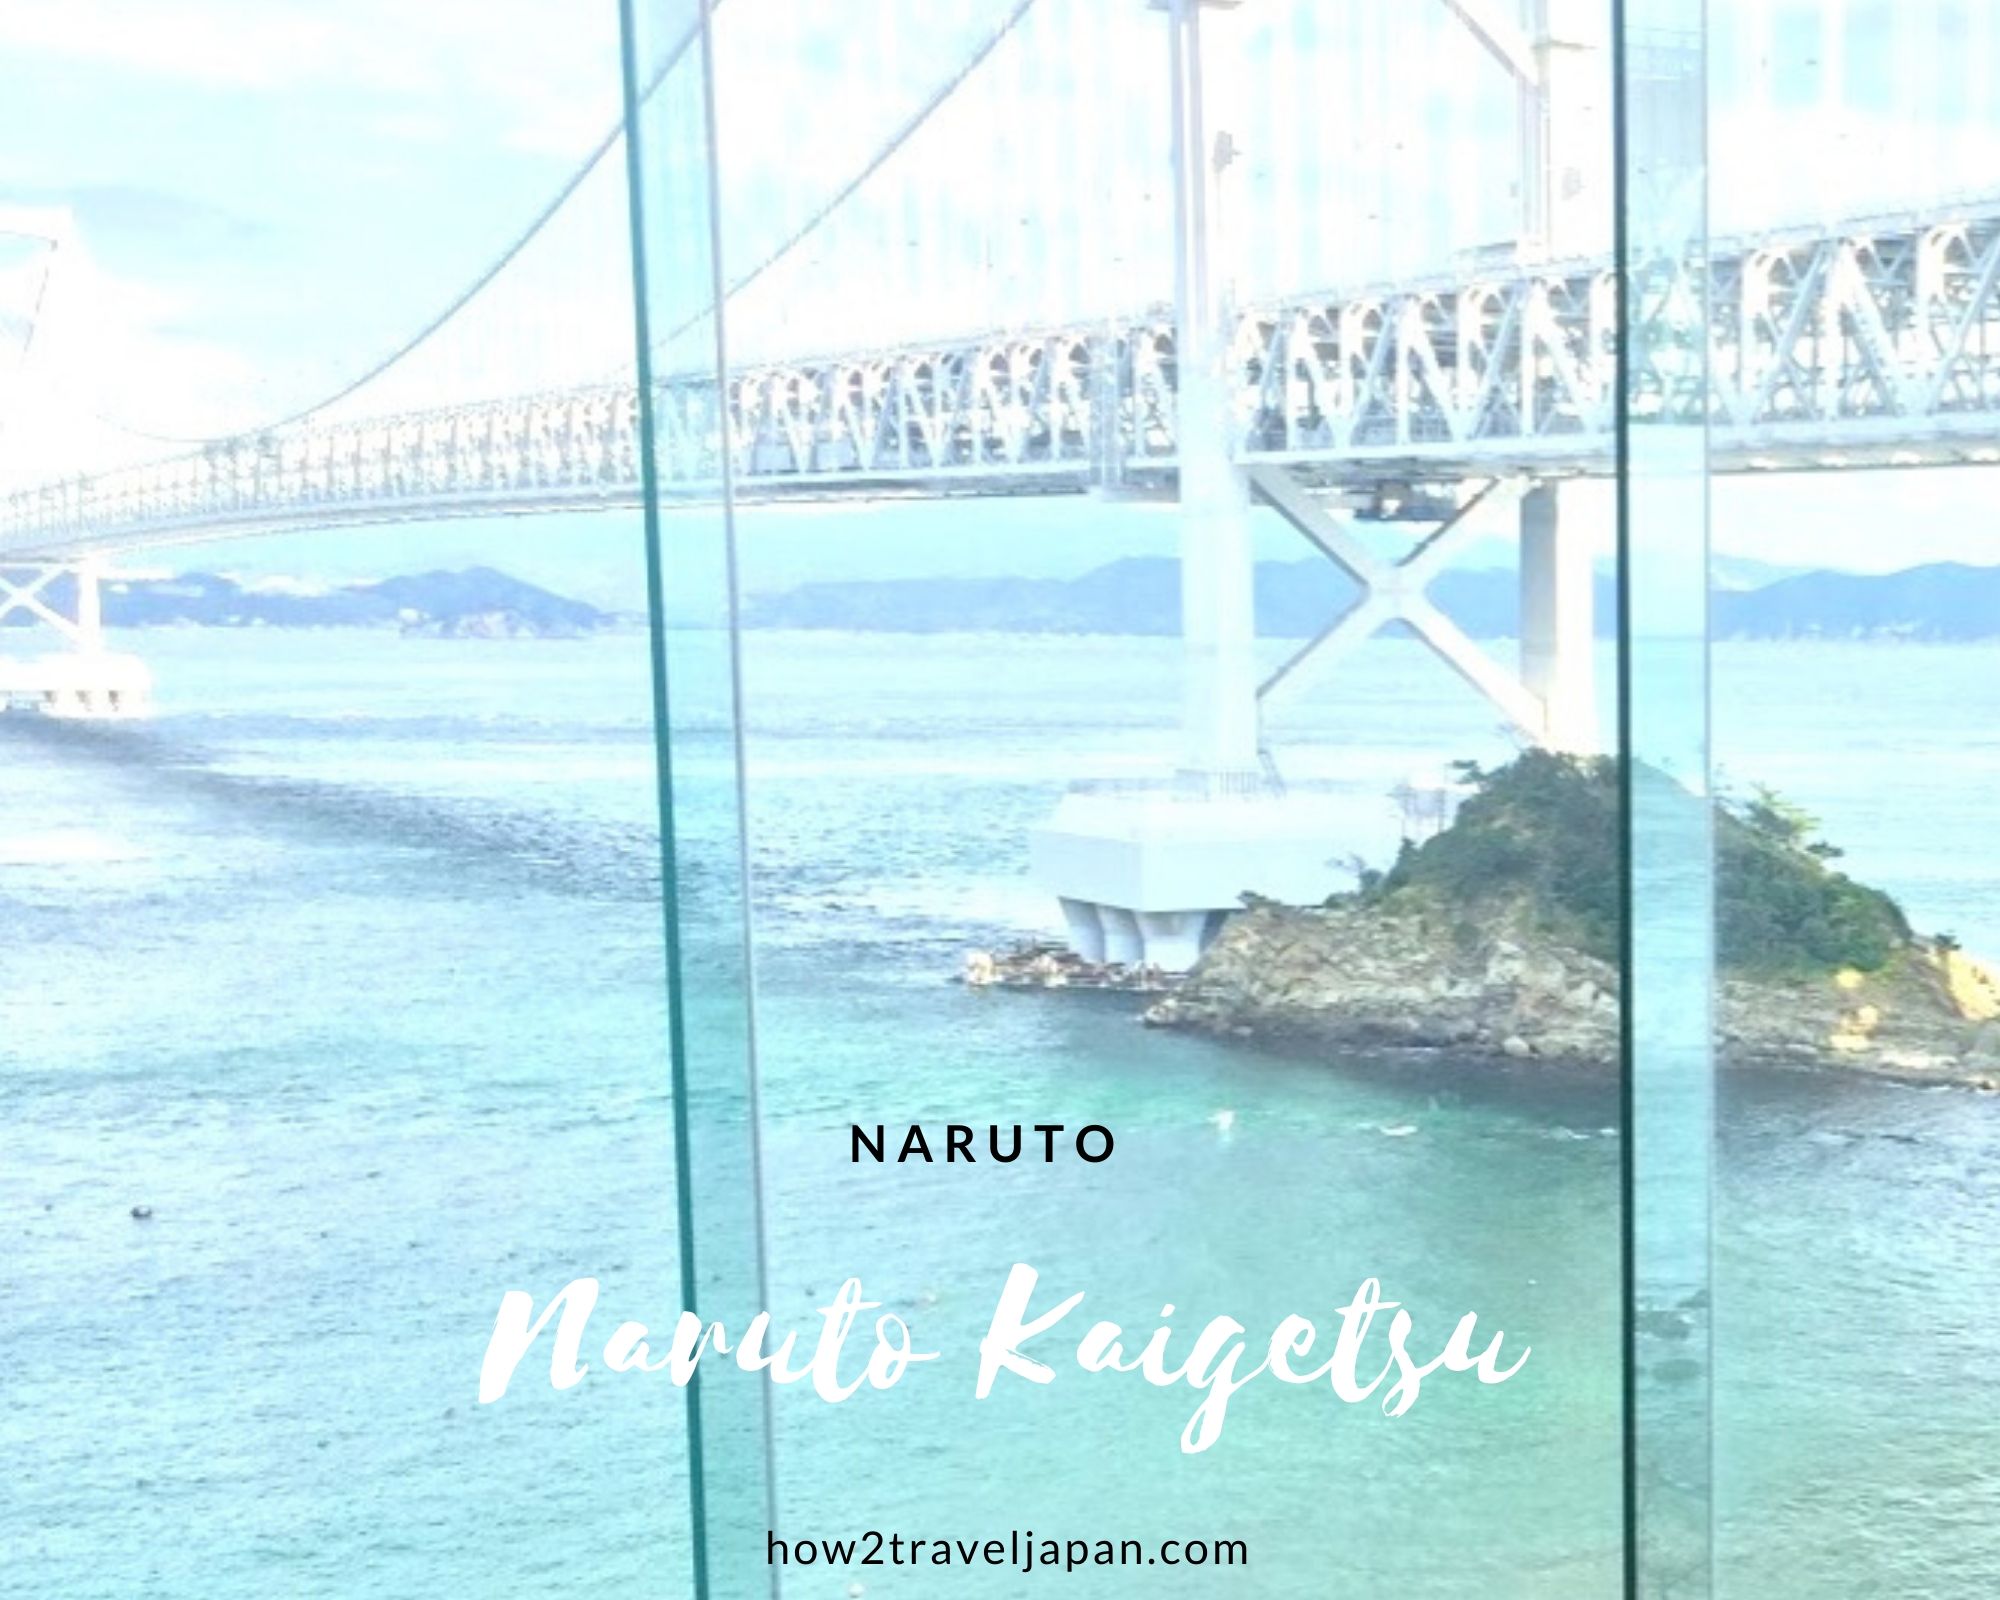 You are currently viewing Naruto Kaigetsu, the hotel with a fantastic view in Naruto